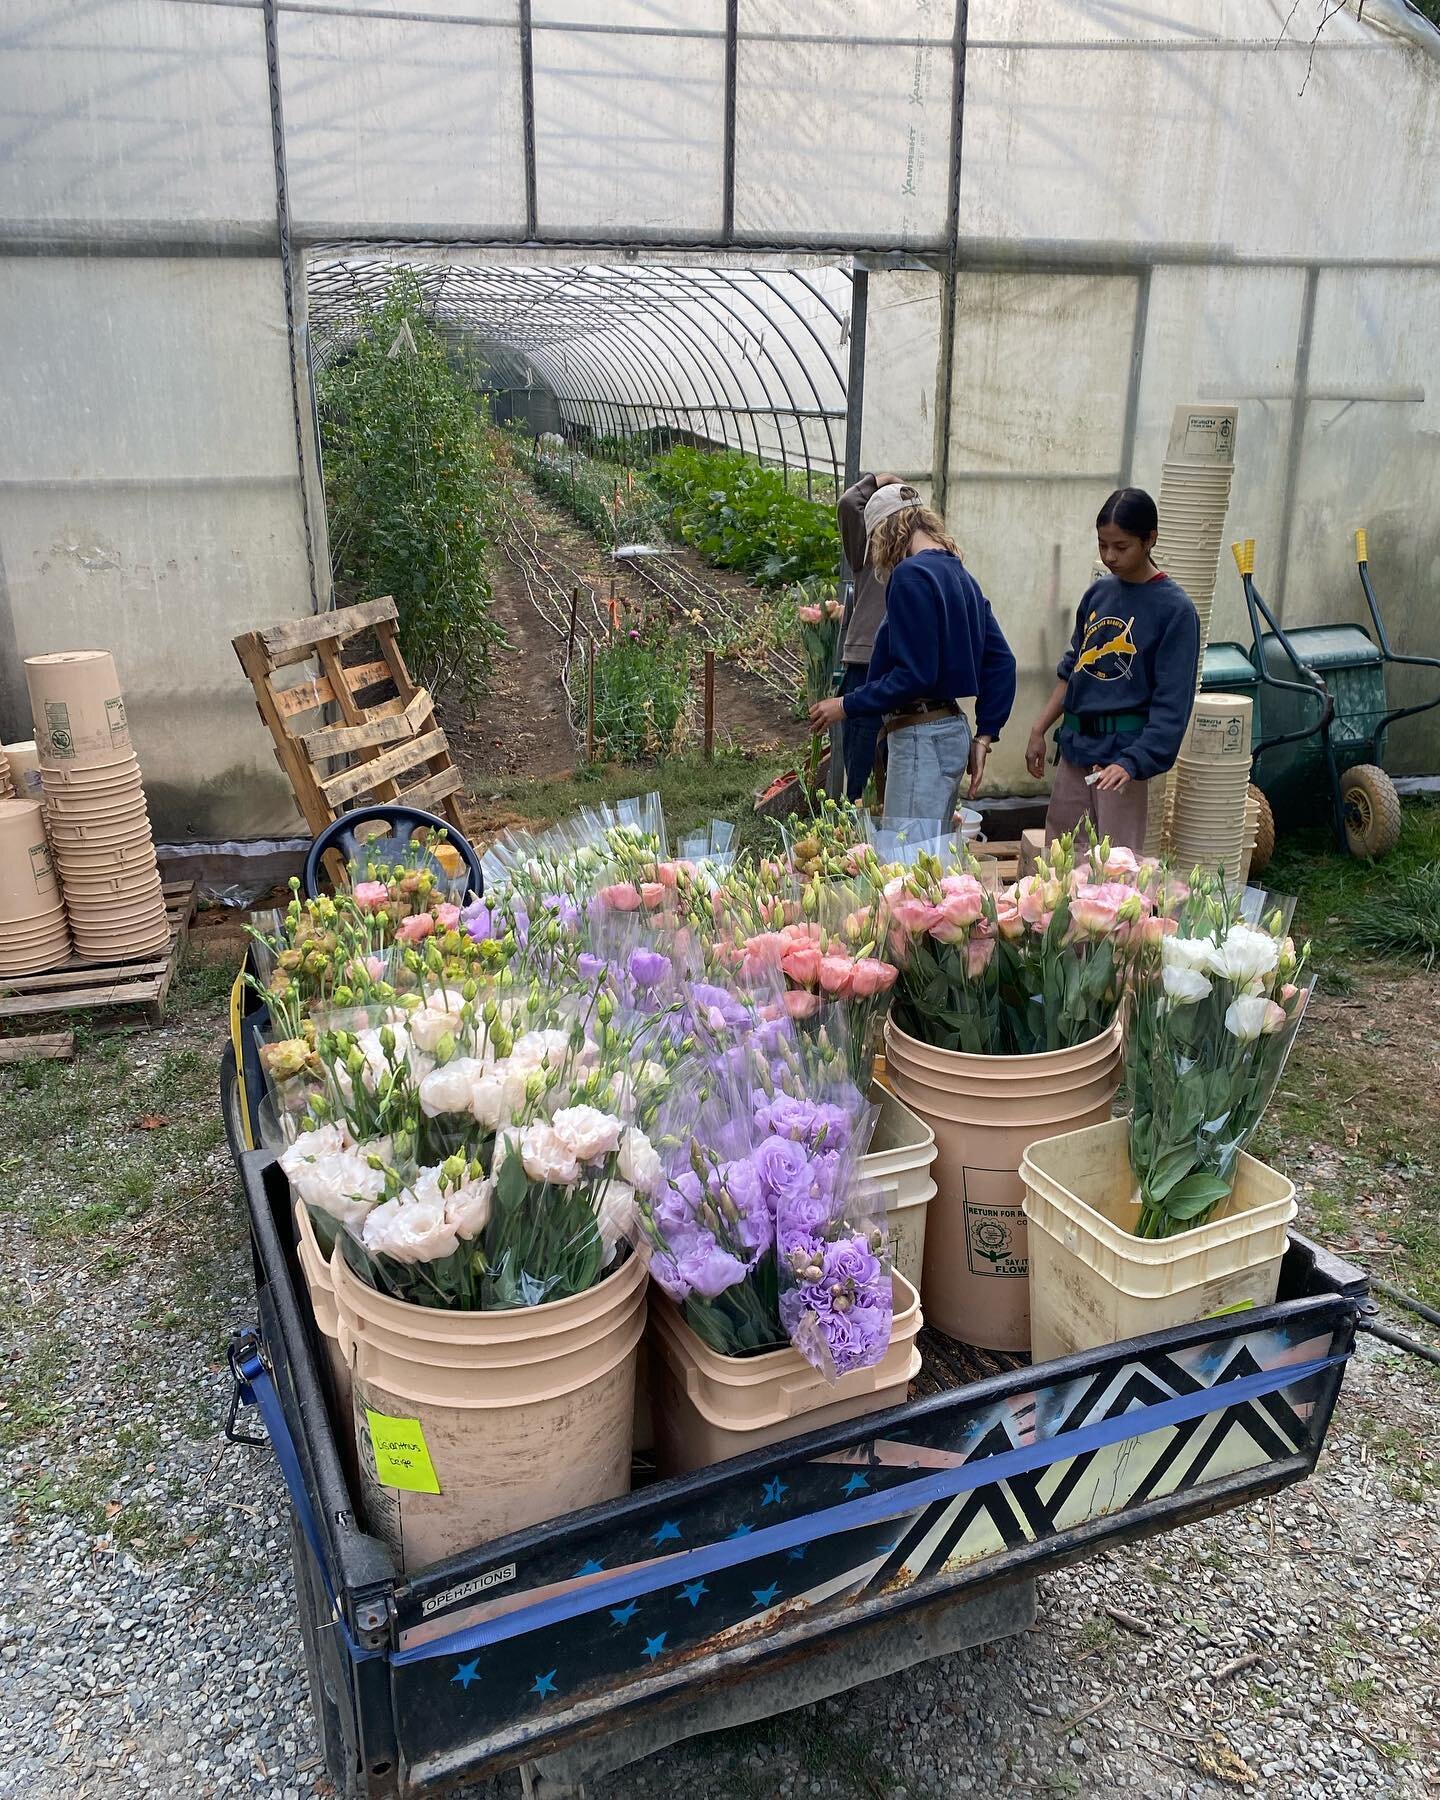 Trusty flower cart bringing in the September 2023 harvest.

On auction September 12th:
Lisianthus in lilac, blush, and white
Rudbeckia Sahara
Tweedia
Zinnia Queen Orange Lime
Celosia flamingo feather
Phlox cherry caramel
And more&hellip;